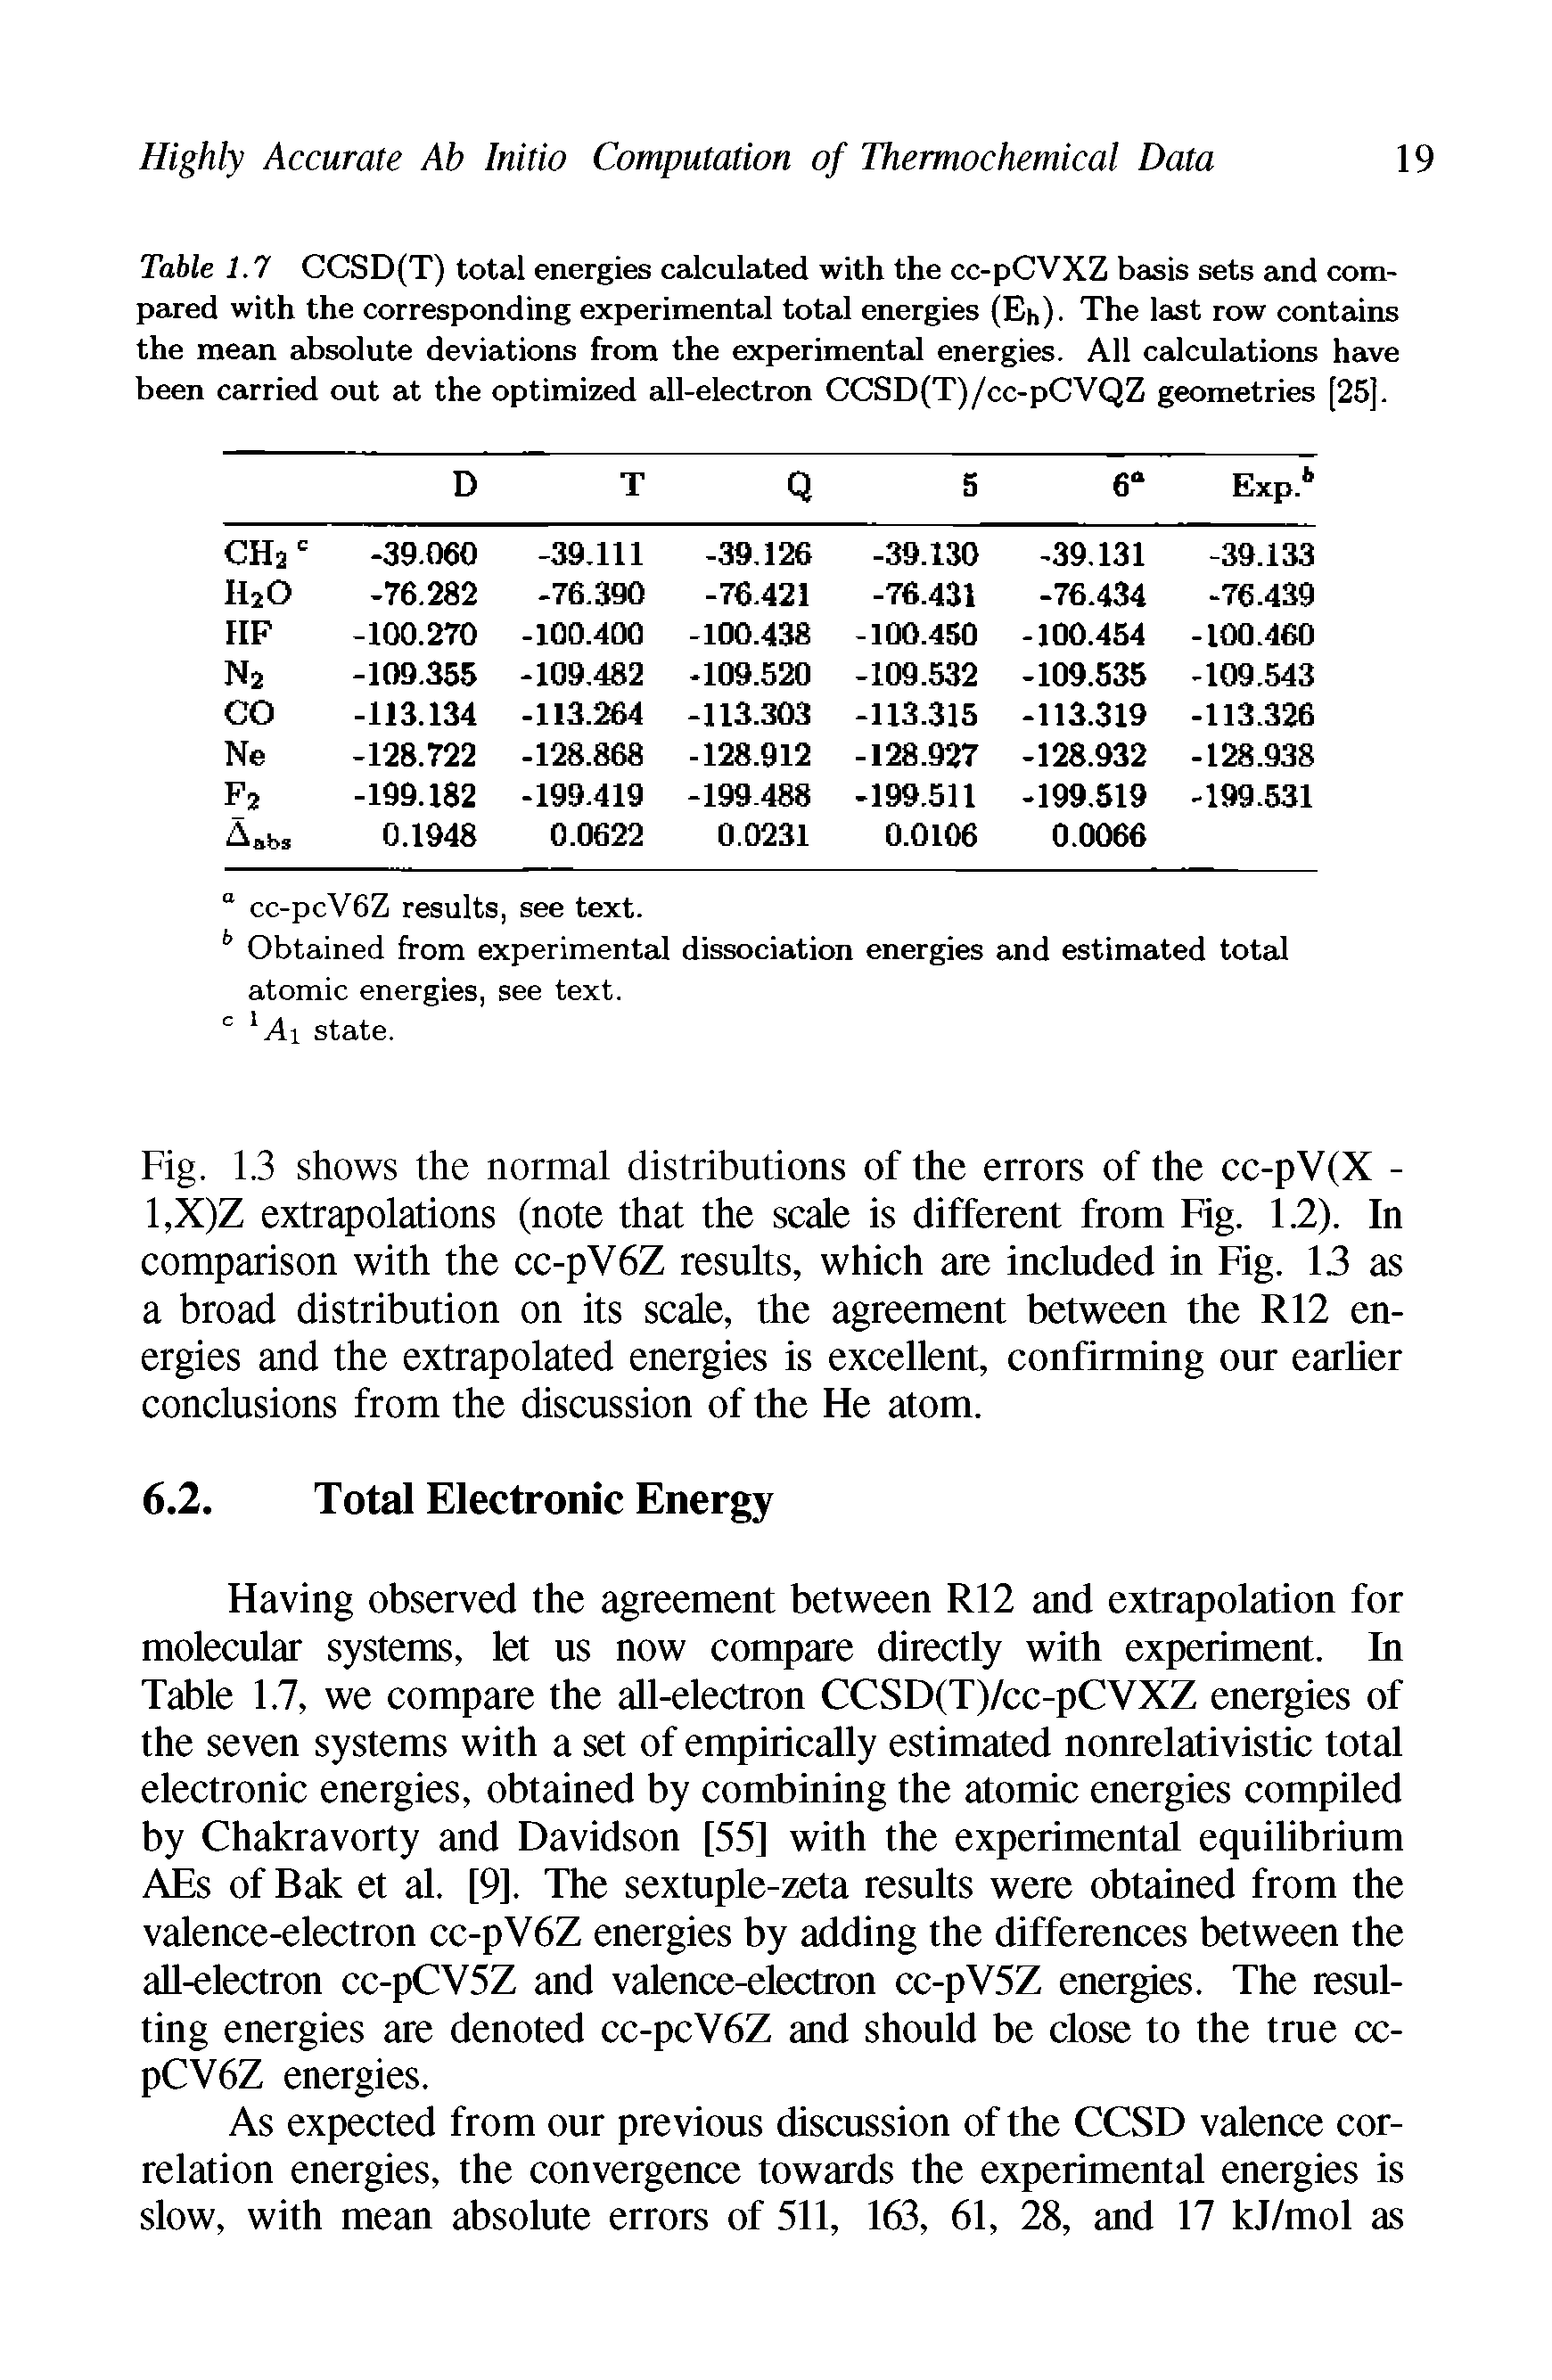 Table 1.7 CCSD(T) total energies calculated with the cc-pCVXZ basis sets and compared with the corresponding experimental total energies (Eh). The last row contains the mean absolute deviations from the experimental energies. All calculations have been carried out at the optimized all-electron CCSD(T)/cc-pCVQZ geometries [25].